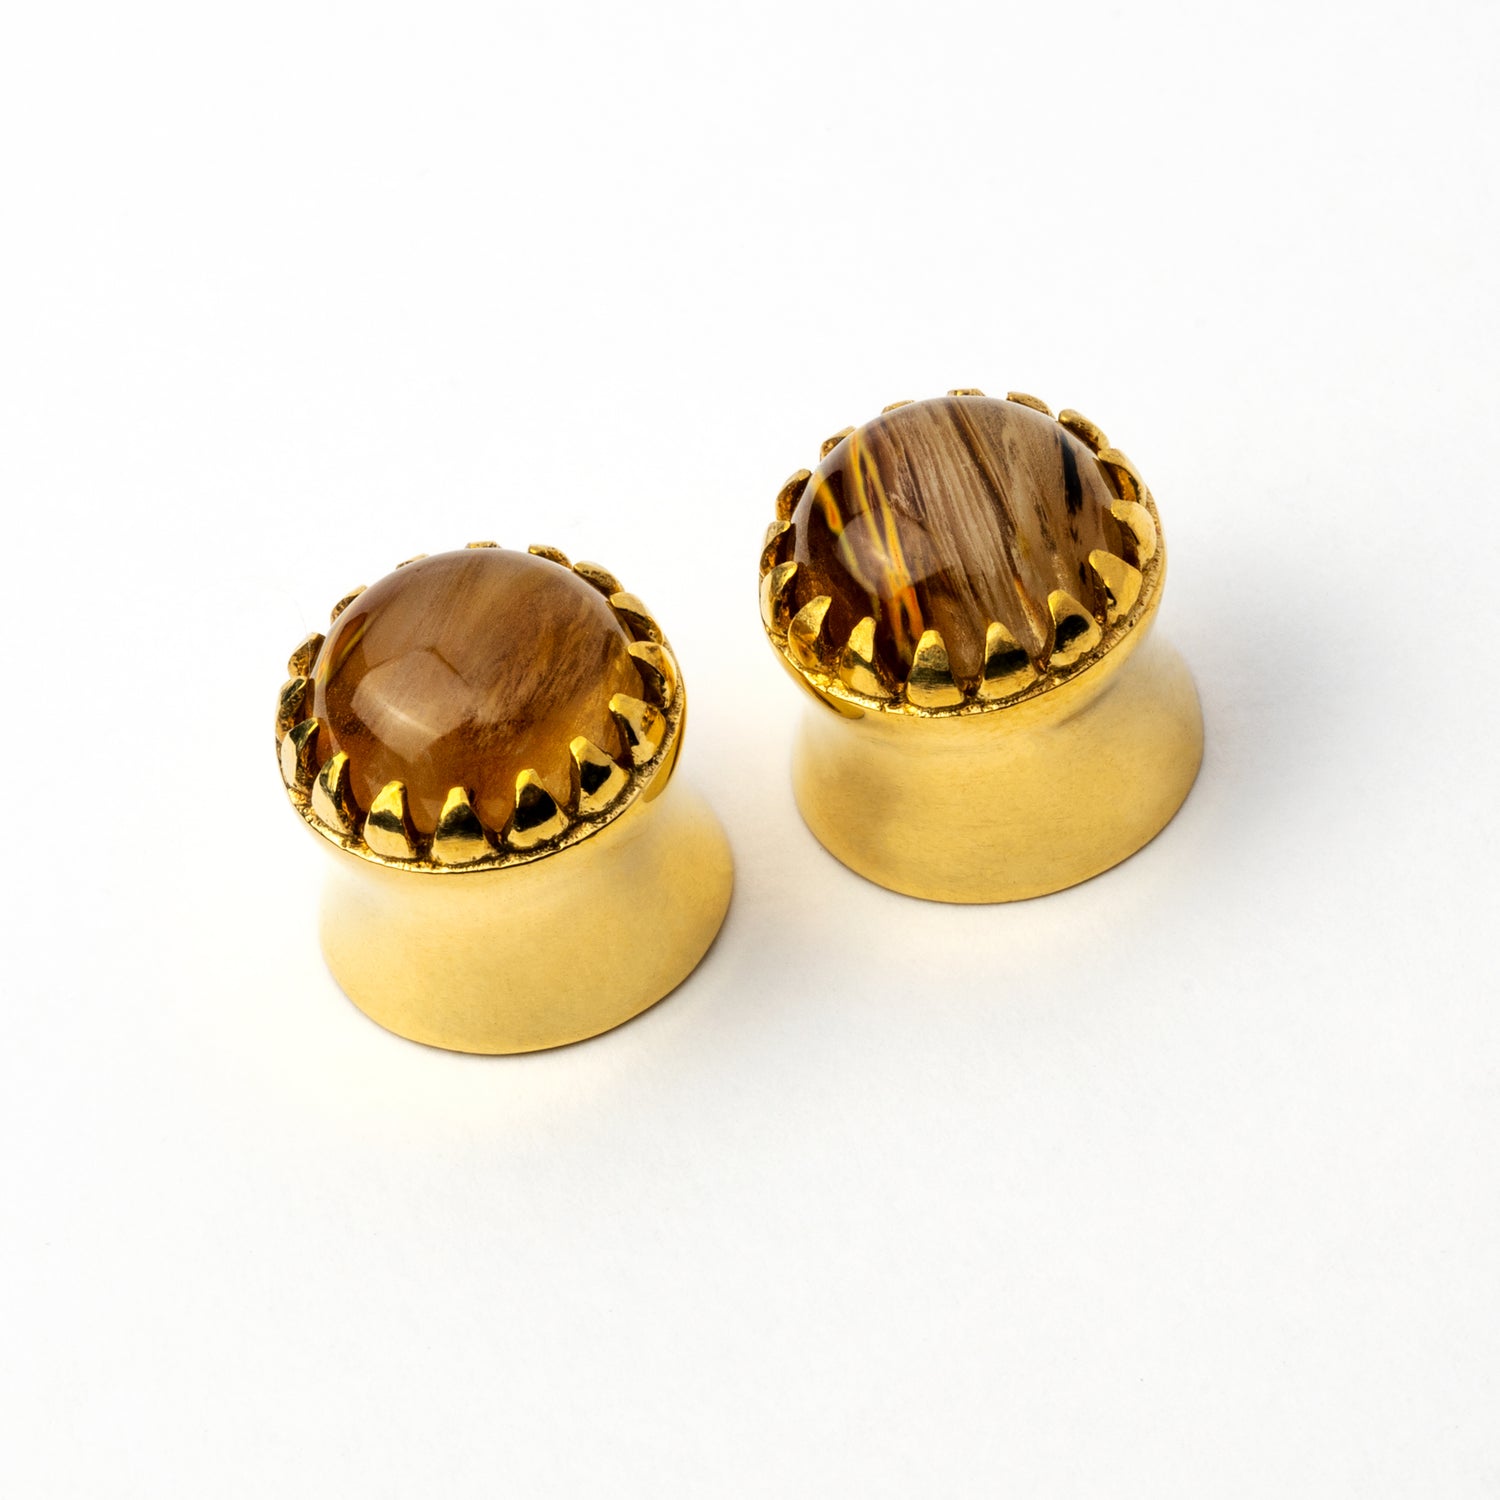 couple of golden plug earrings crown shaped with tiger eye glass